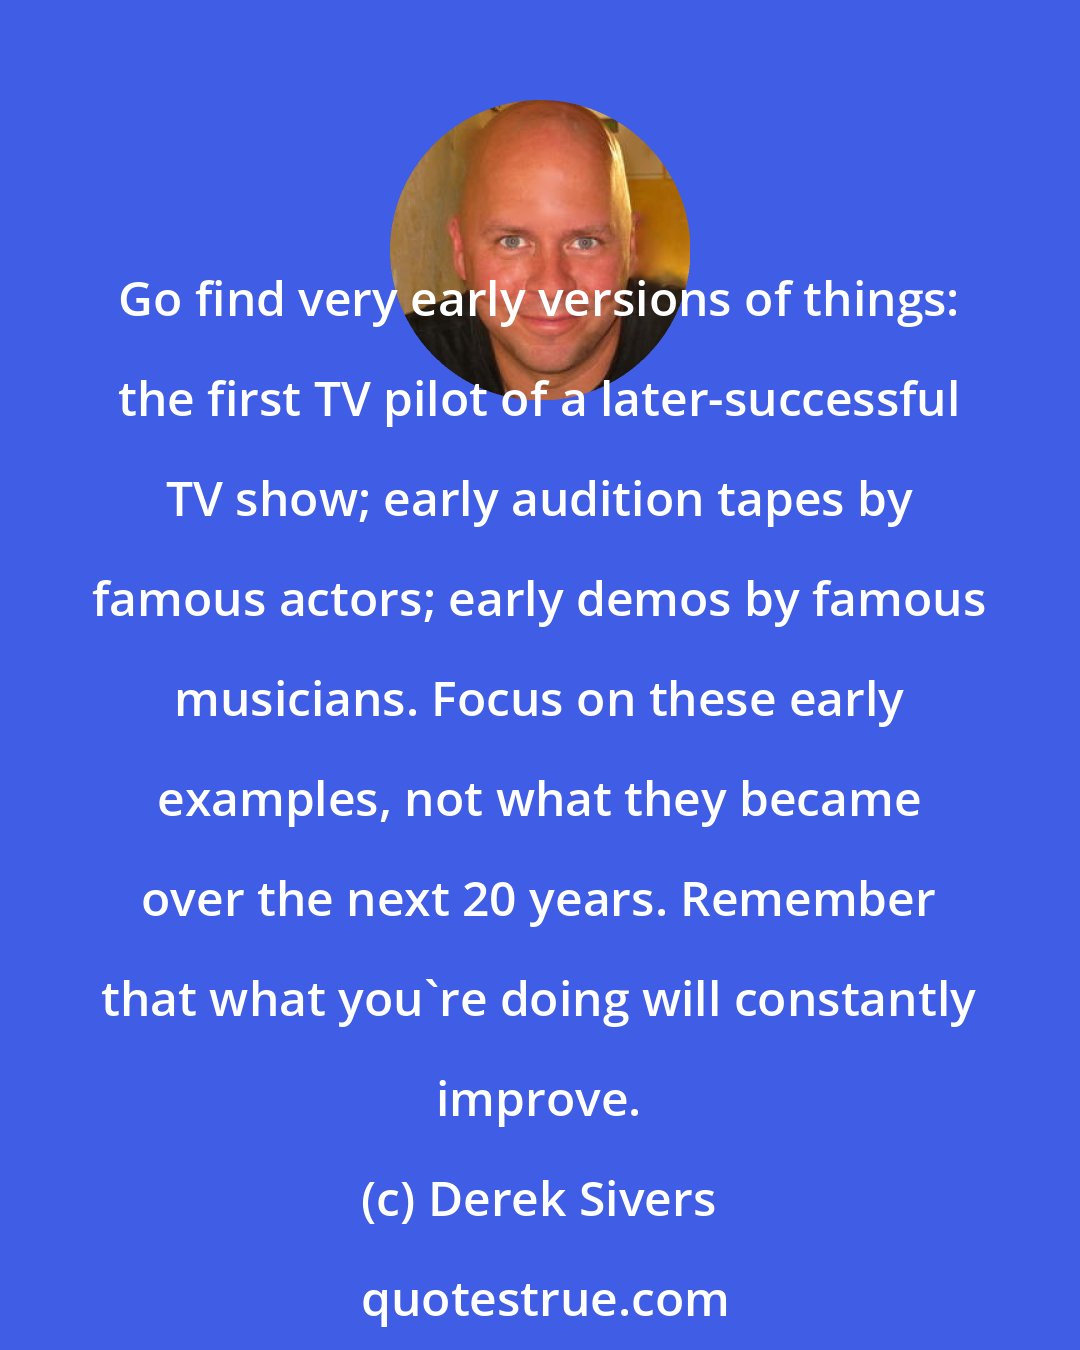 Derek Sivers: Go find very early versions of things: the first TV pilot of a later-successful TV show; early audition tapes by famous actors; early demos by famous musicians. Focus on these early examples, not what they became over the next 20 years. Remember that what you're doing will constantly improve.